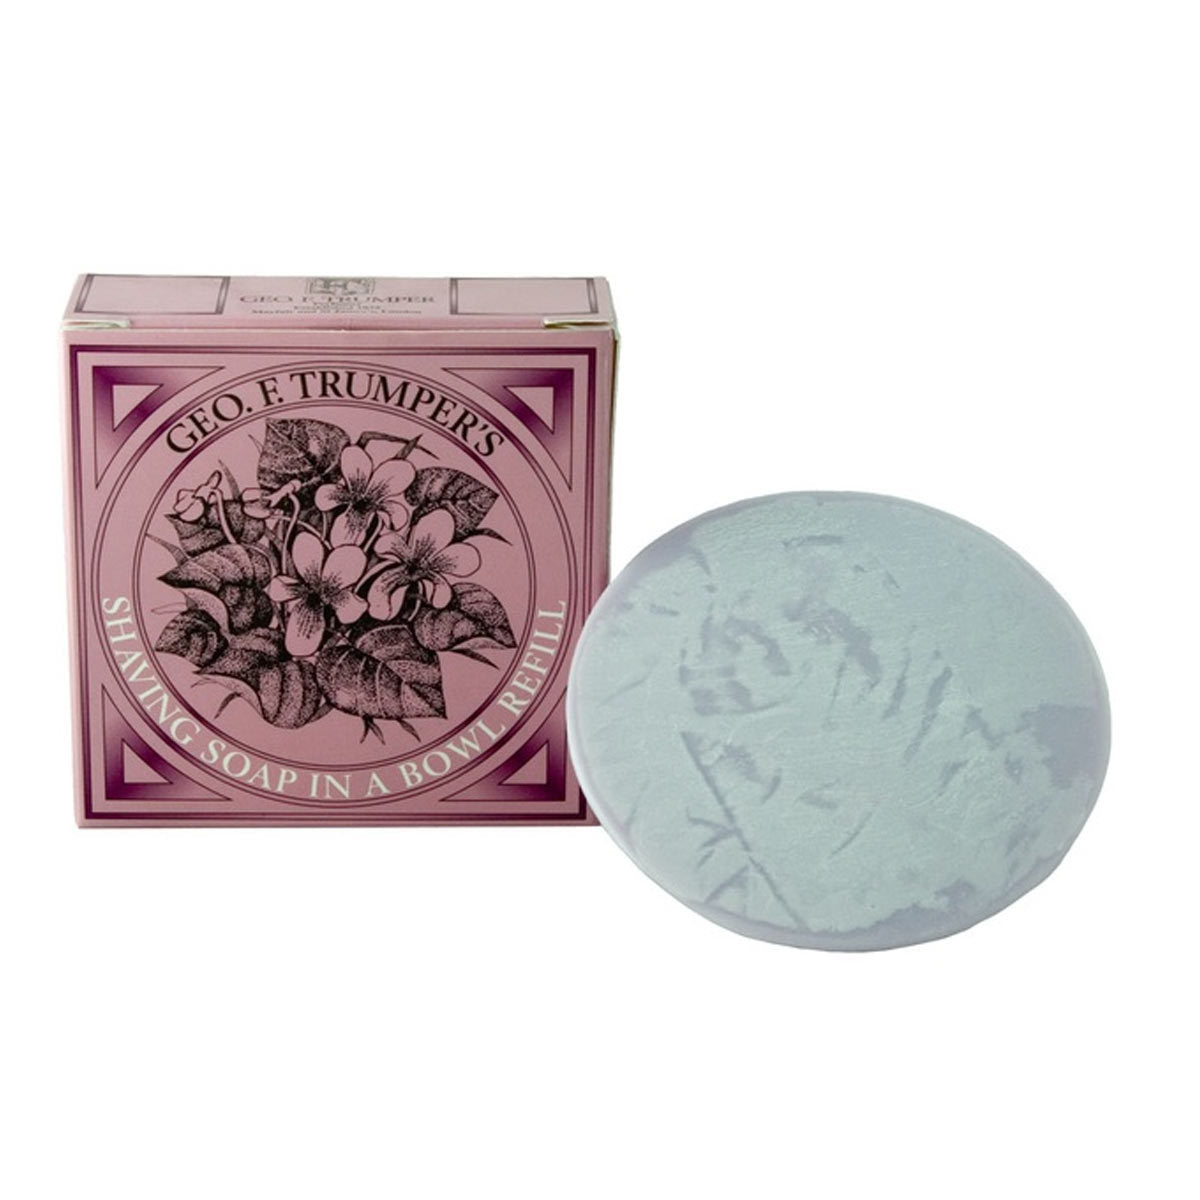 Primary image of Violet Shave Soap Refill